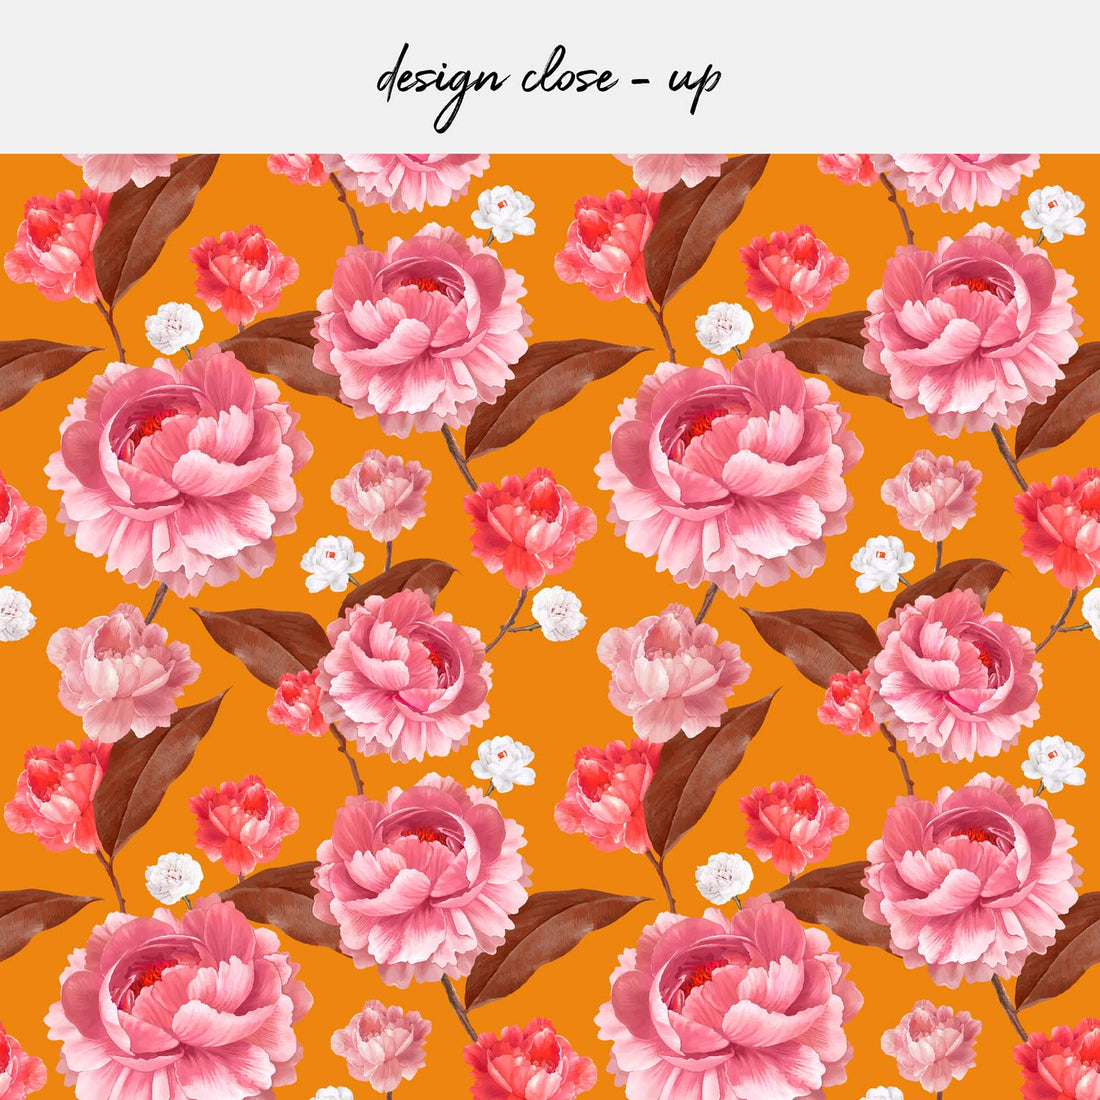 peel and stick backsplash with bright pink and orange florals